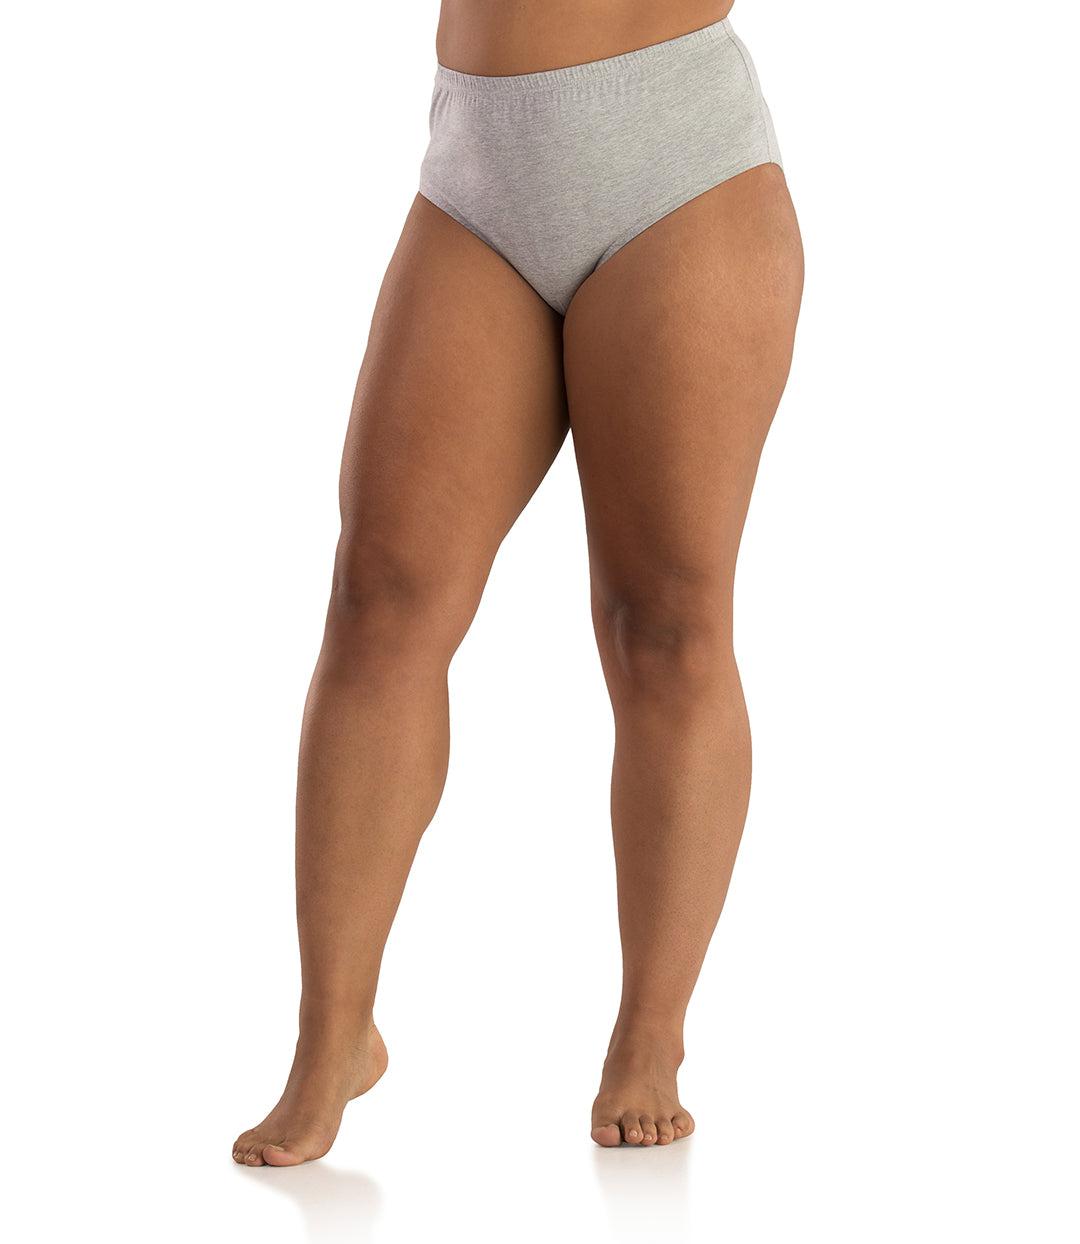 Bottom half of plus sized woman, facing front, wearing JunoActive Junowear Cotton Stretch Classic Brief in heather grey. This brief fits to the waistline with conservative leg opening.